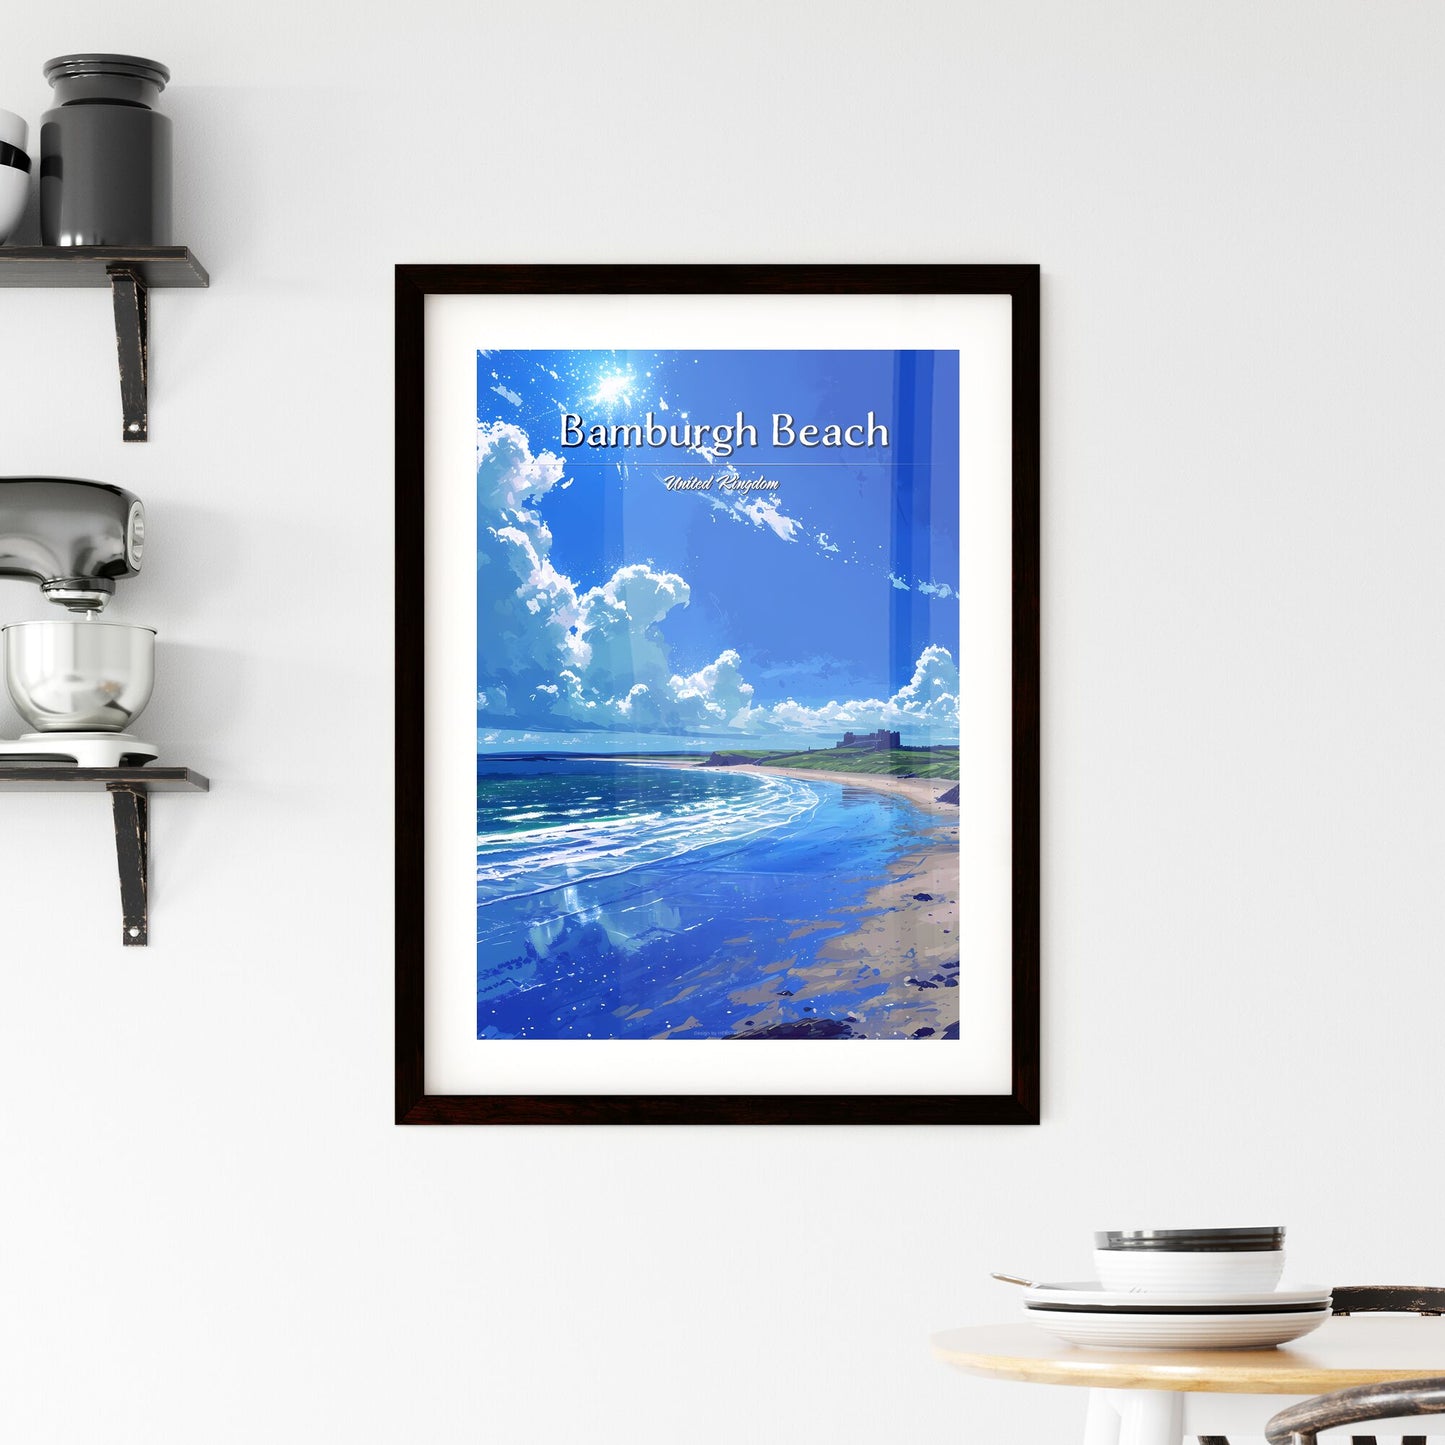 Bamburgh Beach, United Kingdom - Art print of a beach with a castle and blue water Default Title